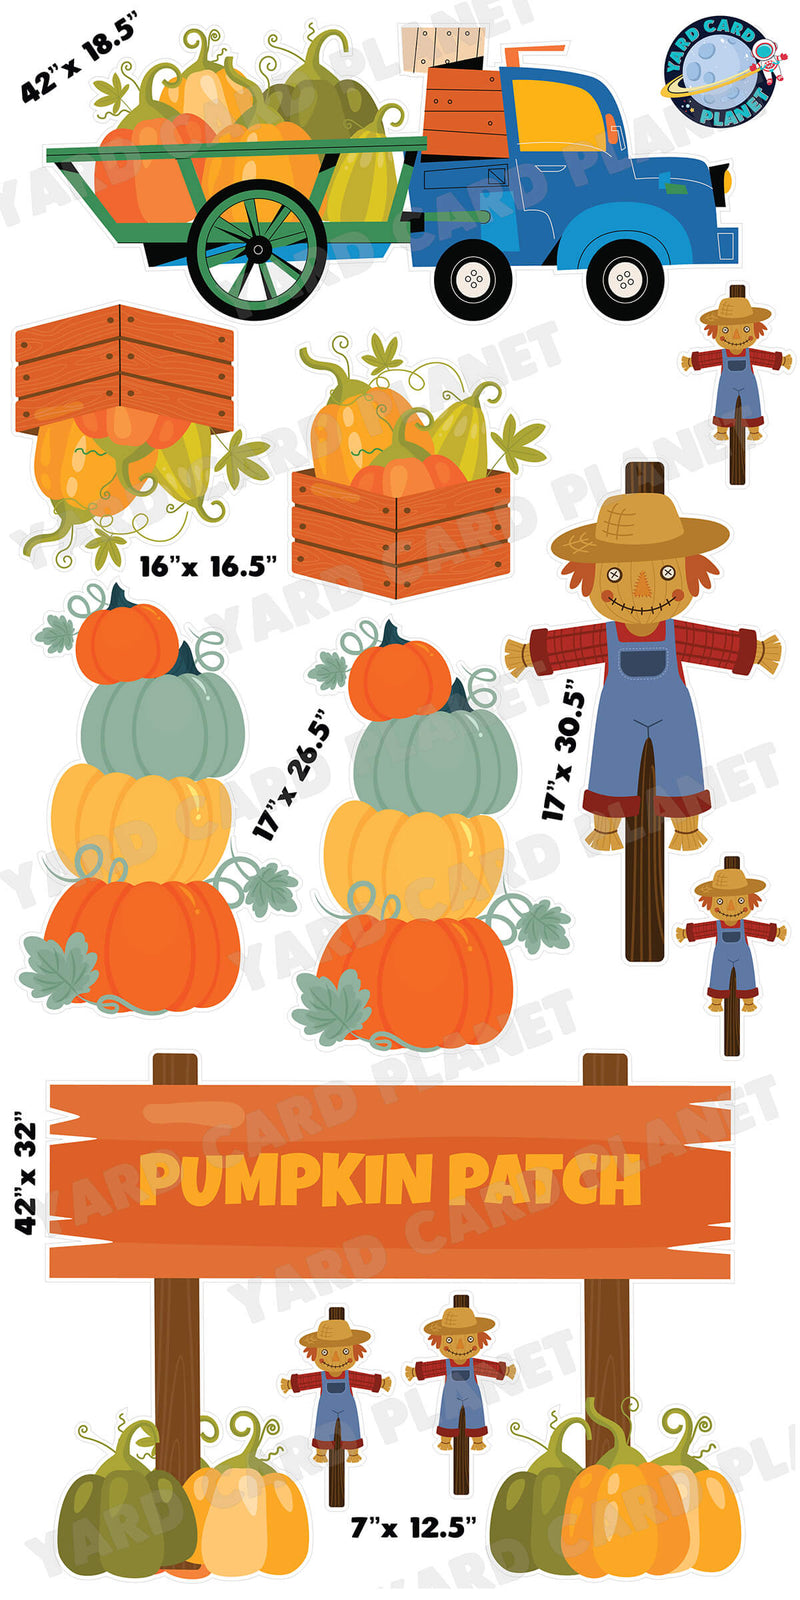 Fall Pumpkin Patch EZ Quick Sign and Yard Card Flair Set with Measurements